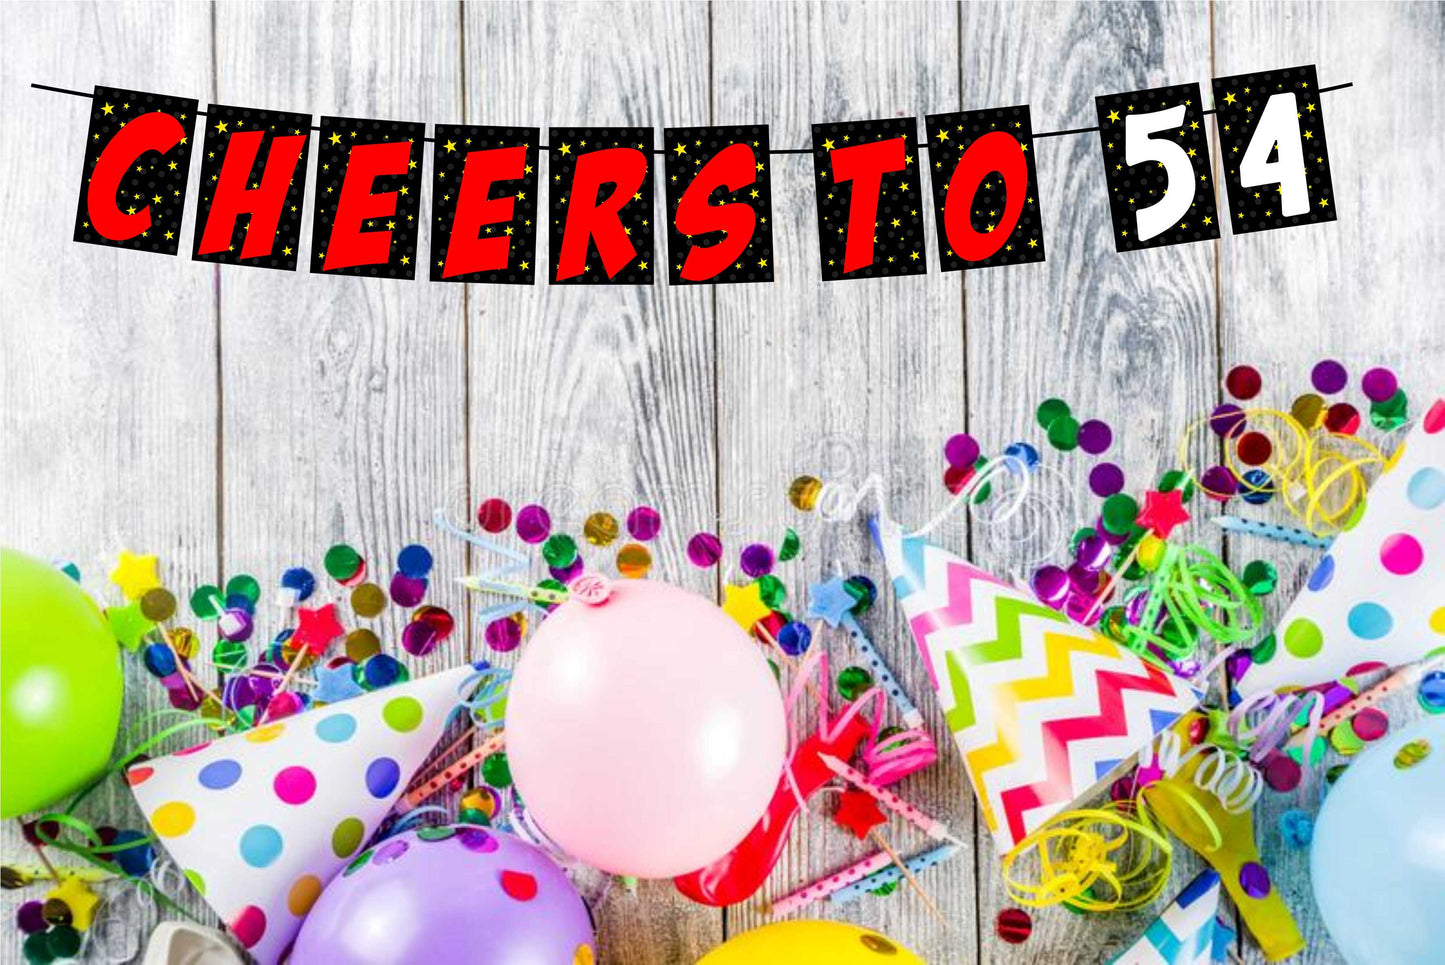 Cheers to 54 Birthday Banner for Photo Shoot Backdrop and Theme Party